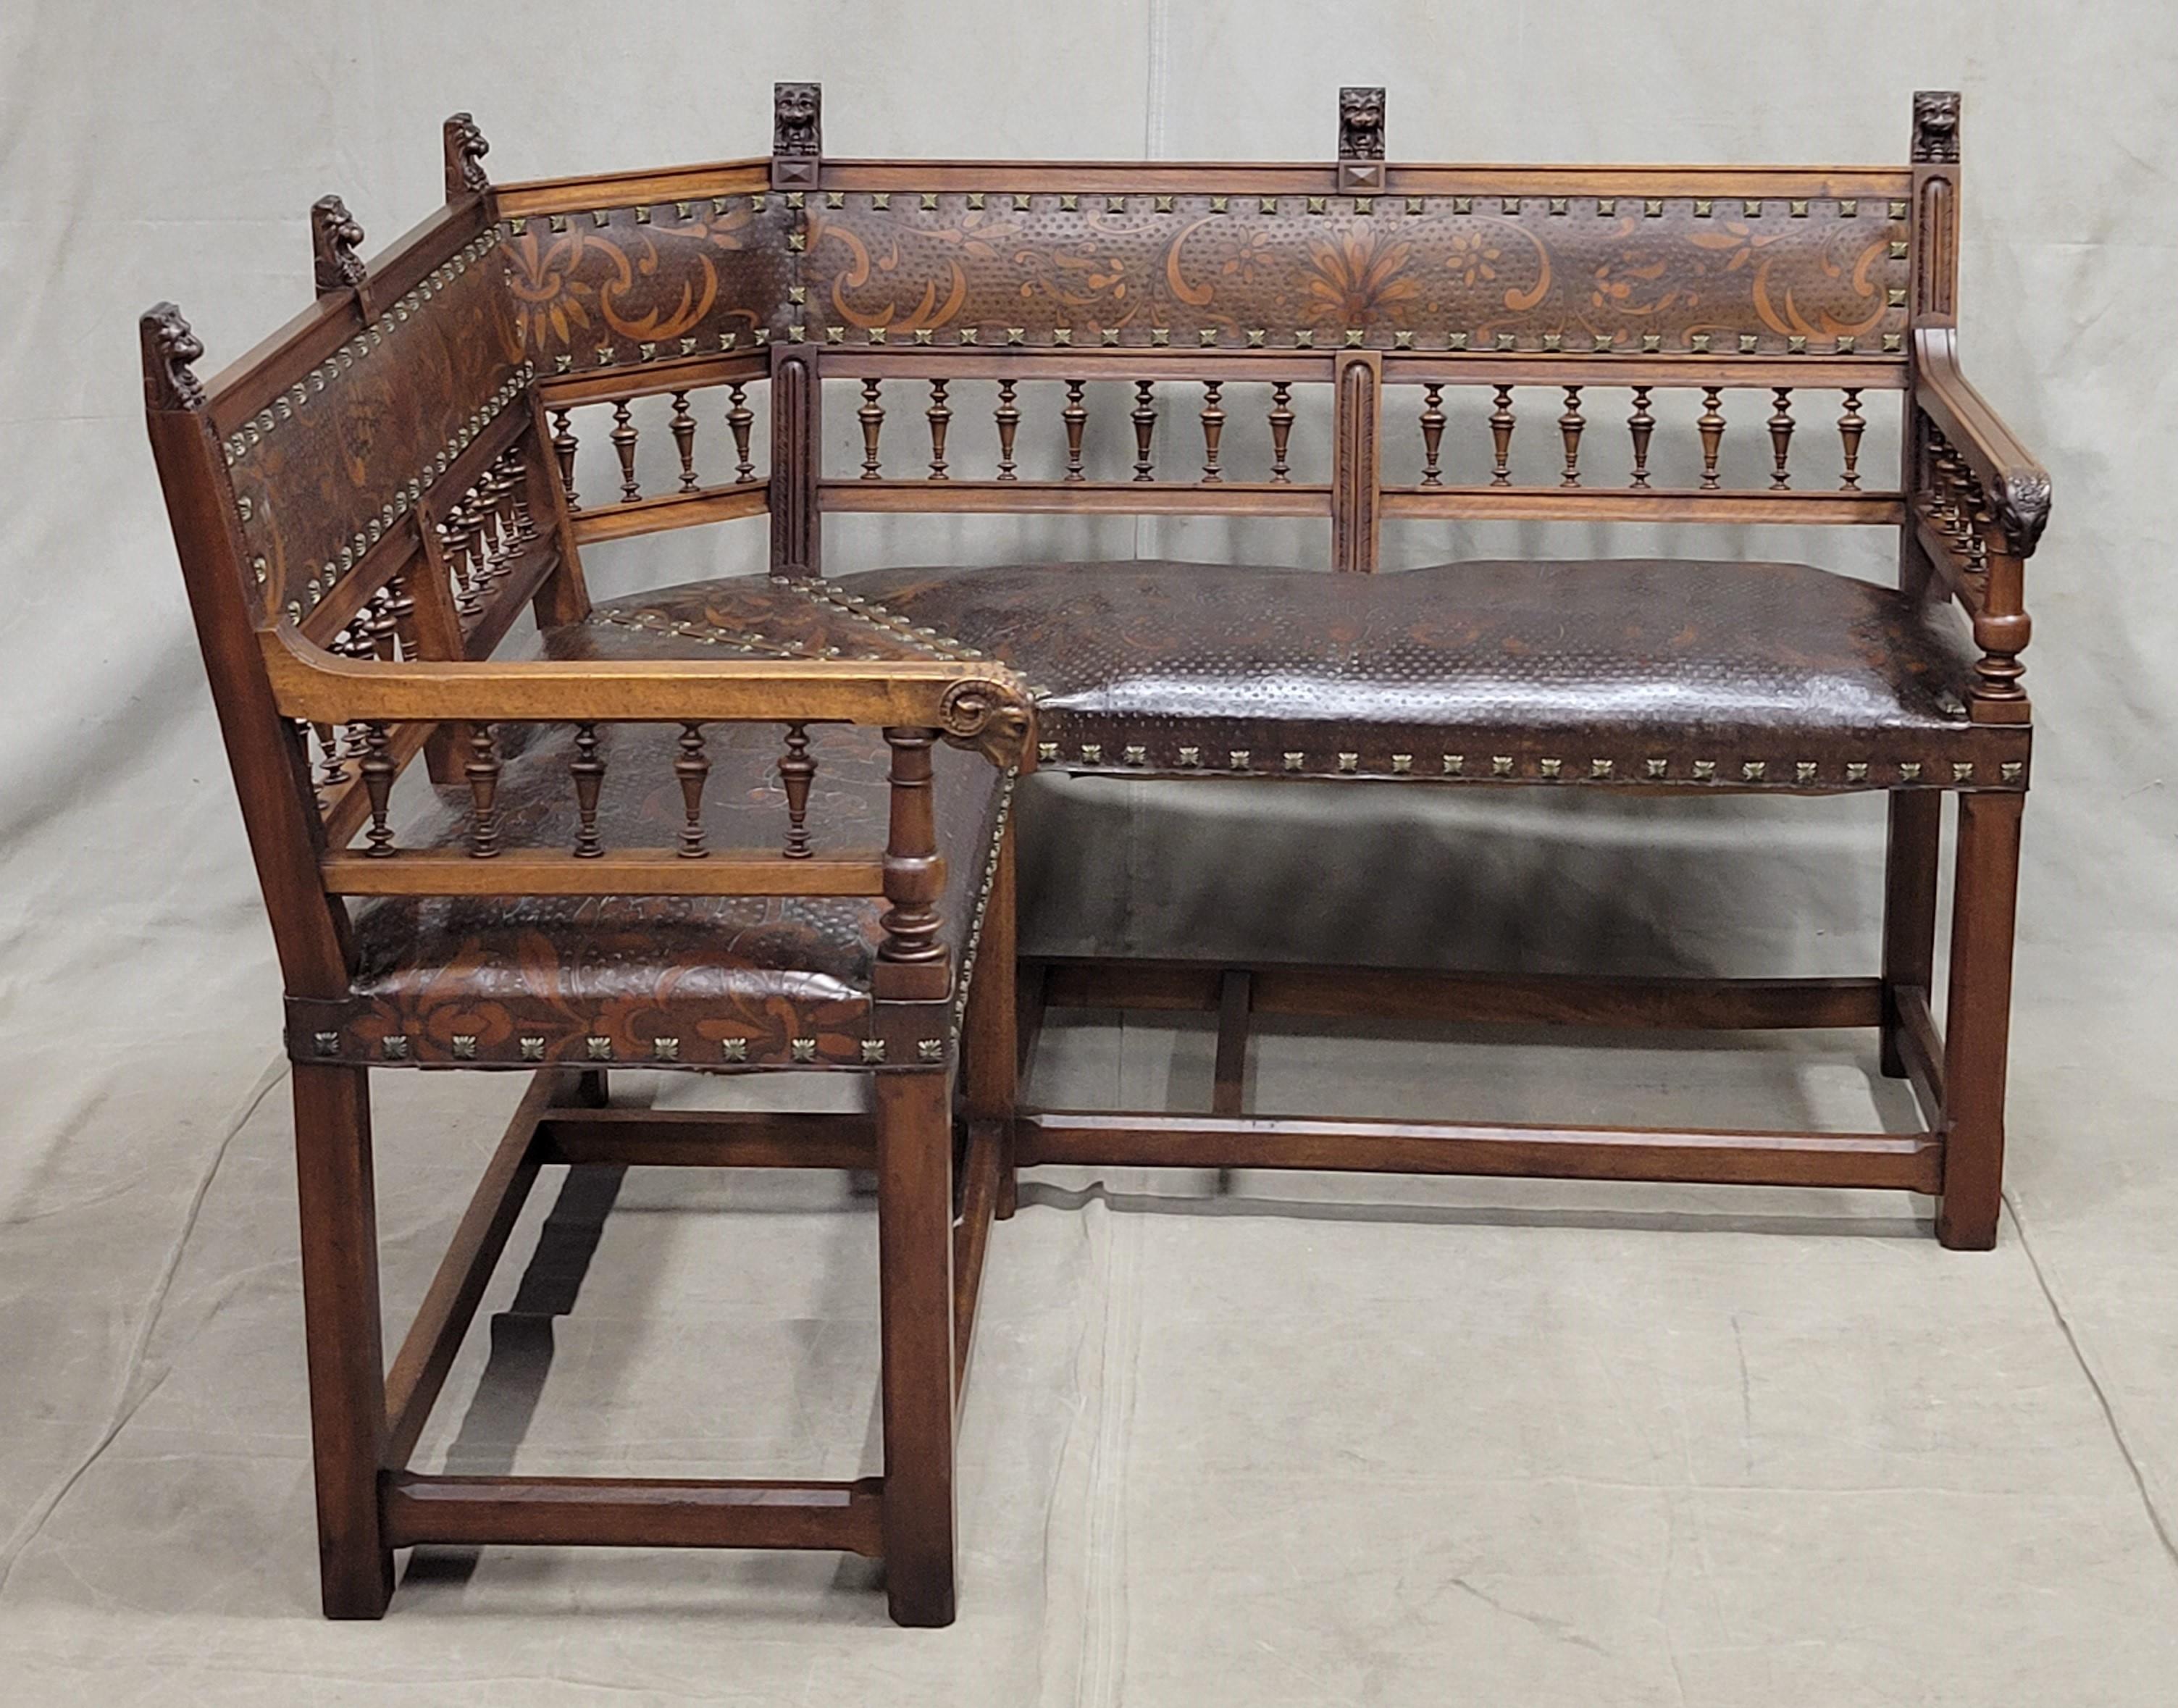 A truly rare find! This antique French banquette bench was carved out of walnut and upholstered with Fine tooled leather and brass Renaissance style tacks. Leather is in immaculate condition. Wood is in excellent condition with just some old,